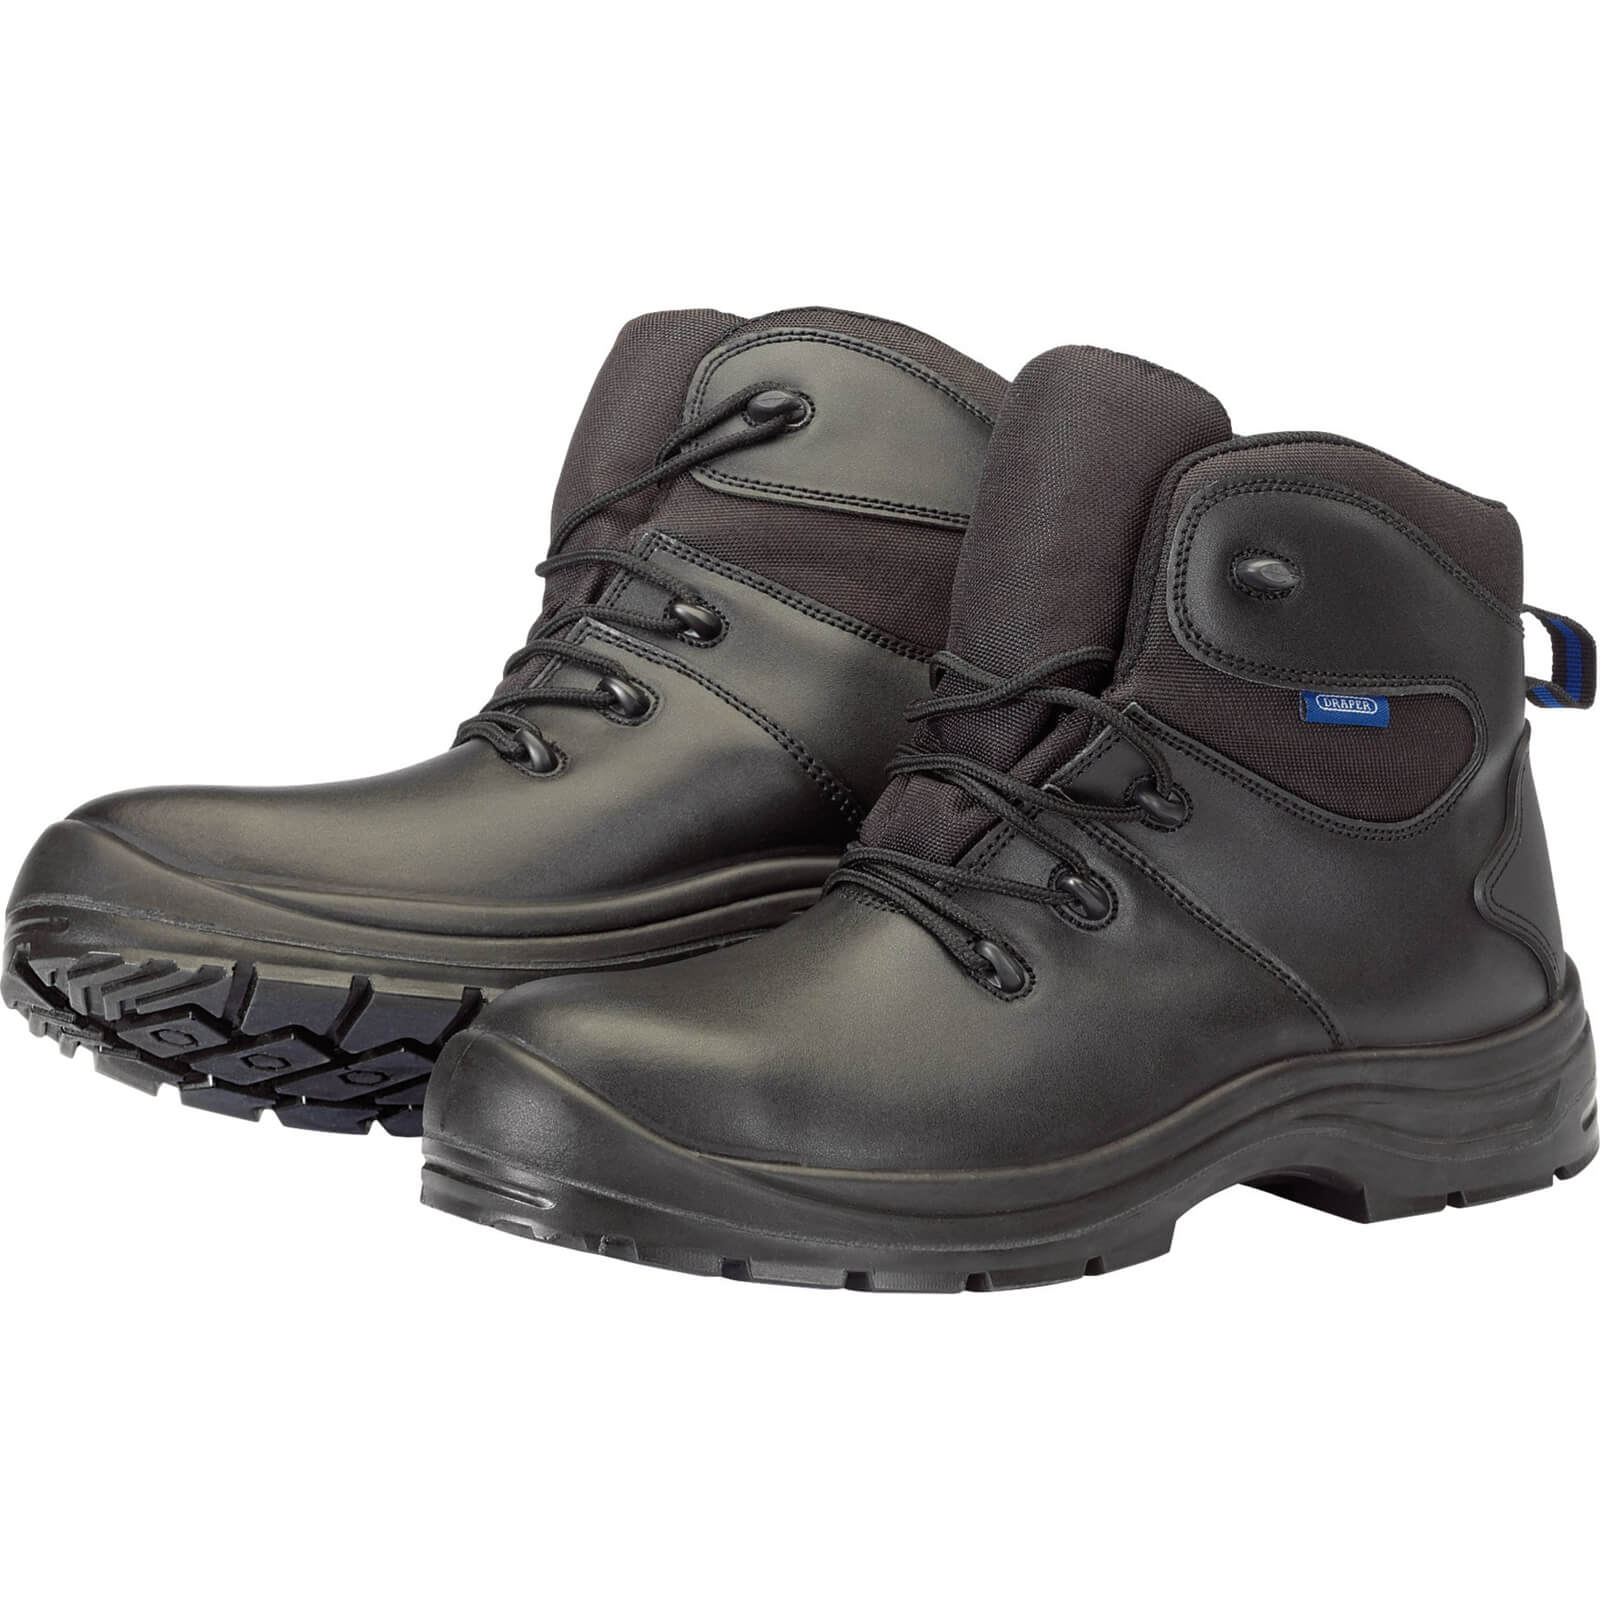 Image of Draper Mens Waterproof Safety Boots Black Size 7